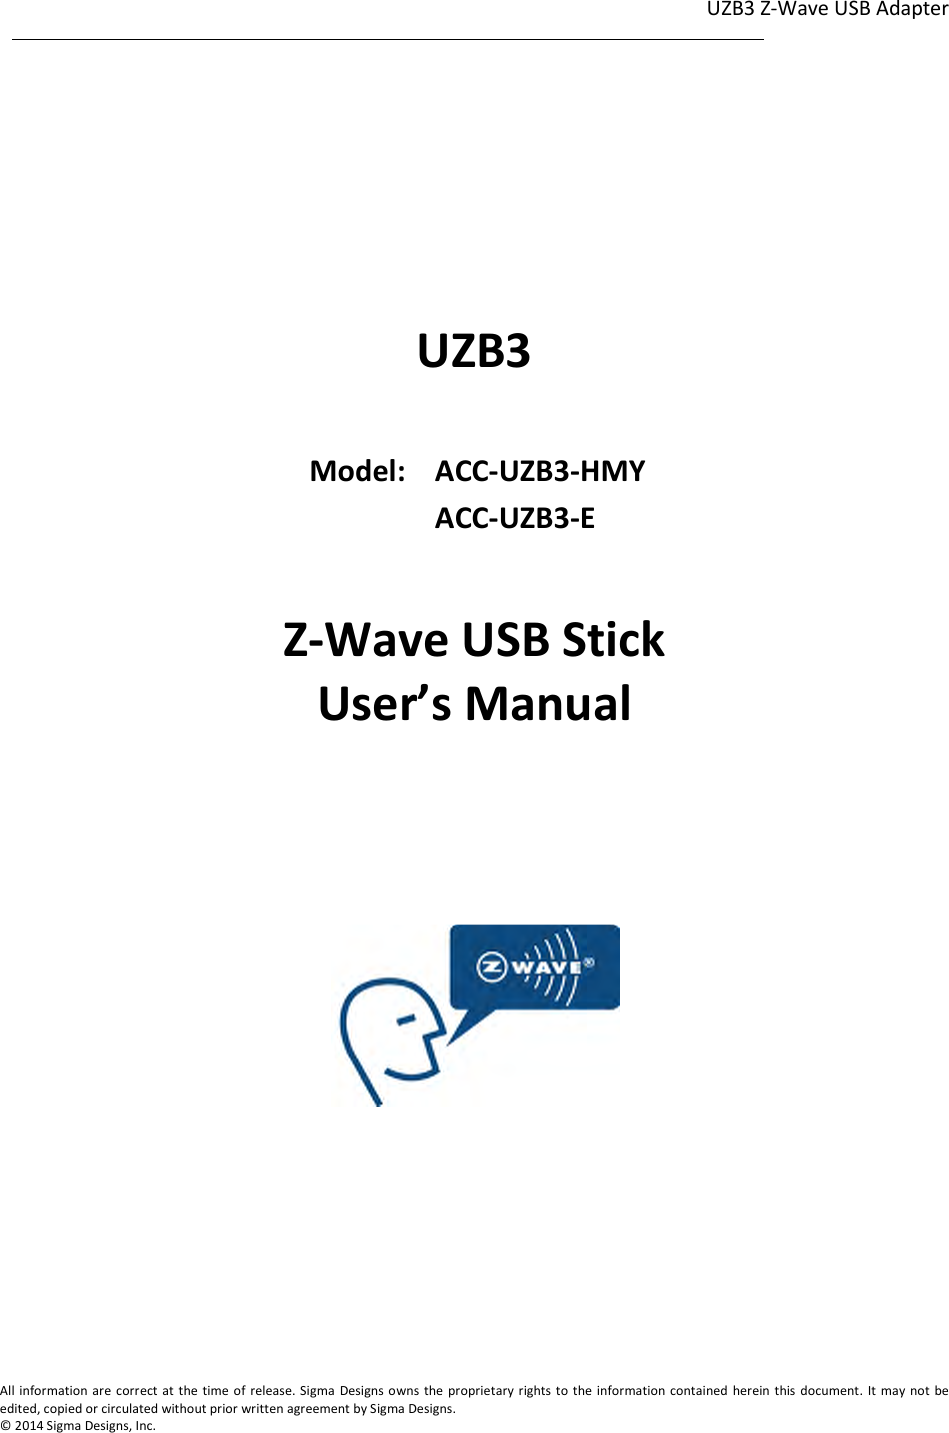 UZB3 Z-Wave USB Adapter  1                                                                                                                                                                                                             1              All information are correct at the time of release. Sigma  Designs owns  the proprietary rights to the information contained herein this document. It  may not  be edited, copied or circulated without prior written agreement by Sigma Designs.   © 2014 Sigma Designs, Inc.       UZB3    Model:  ACC-UZB3-HMY    ACC-UZB3-E  Z-Wave USB Stick User’s Manual           